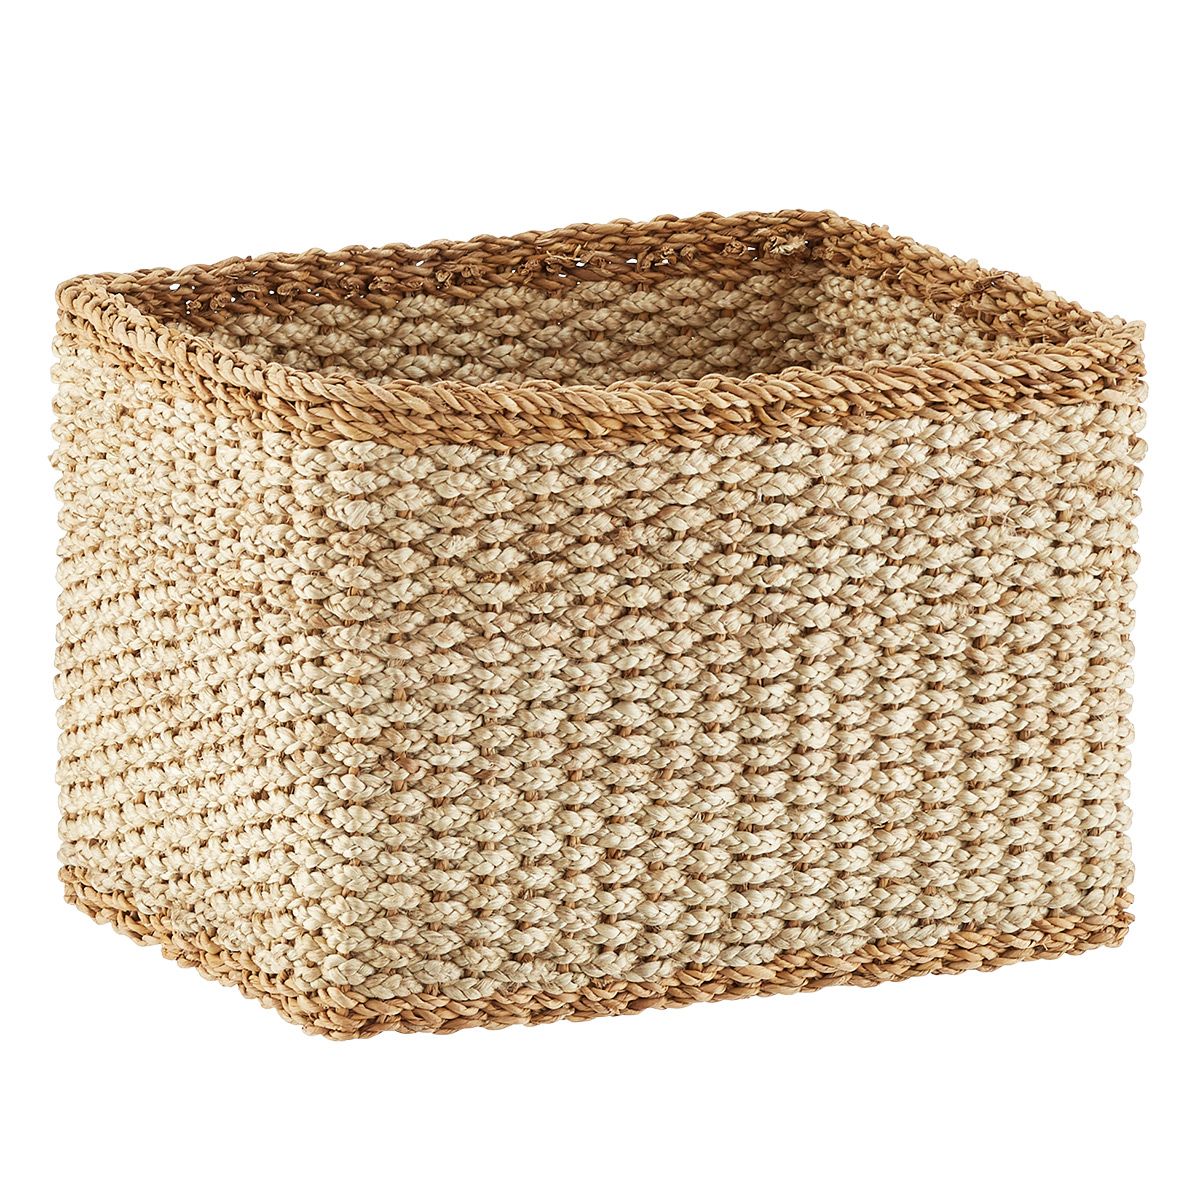 Carmel Baskets | The Container Store